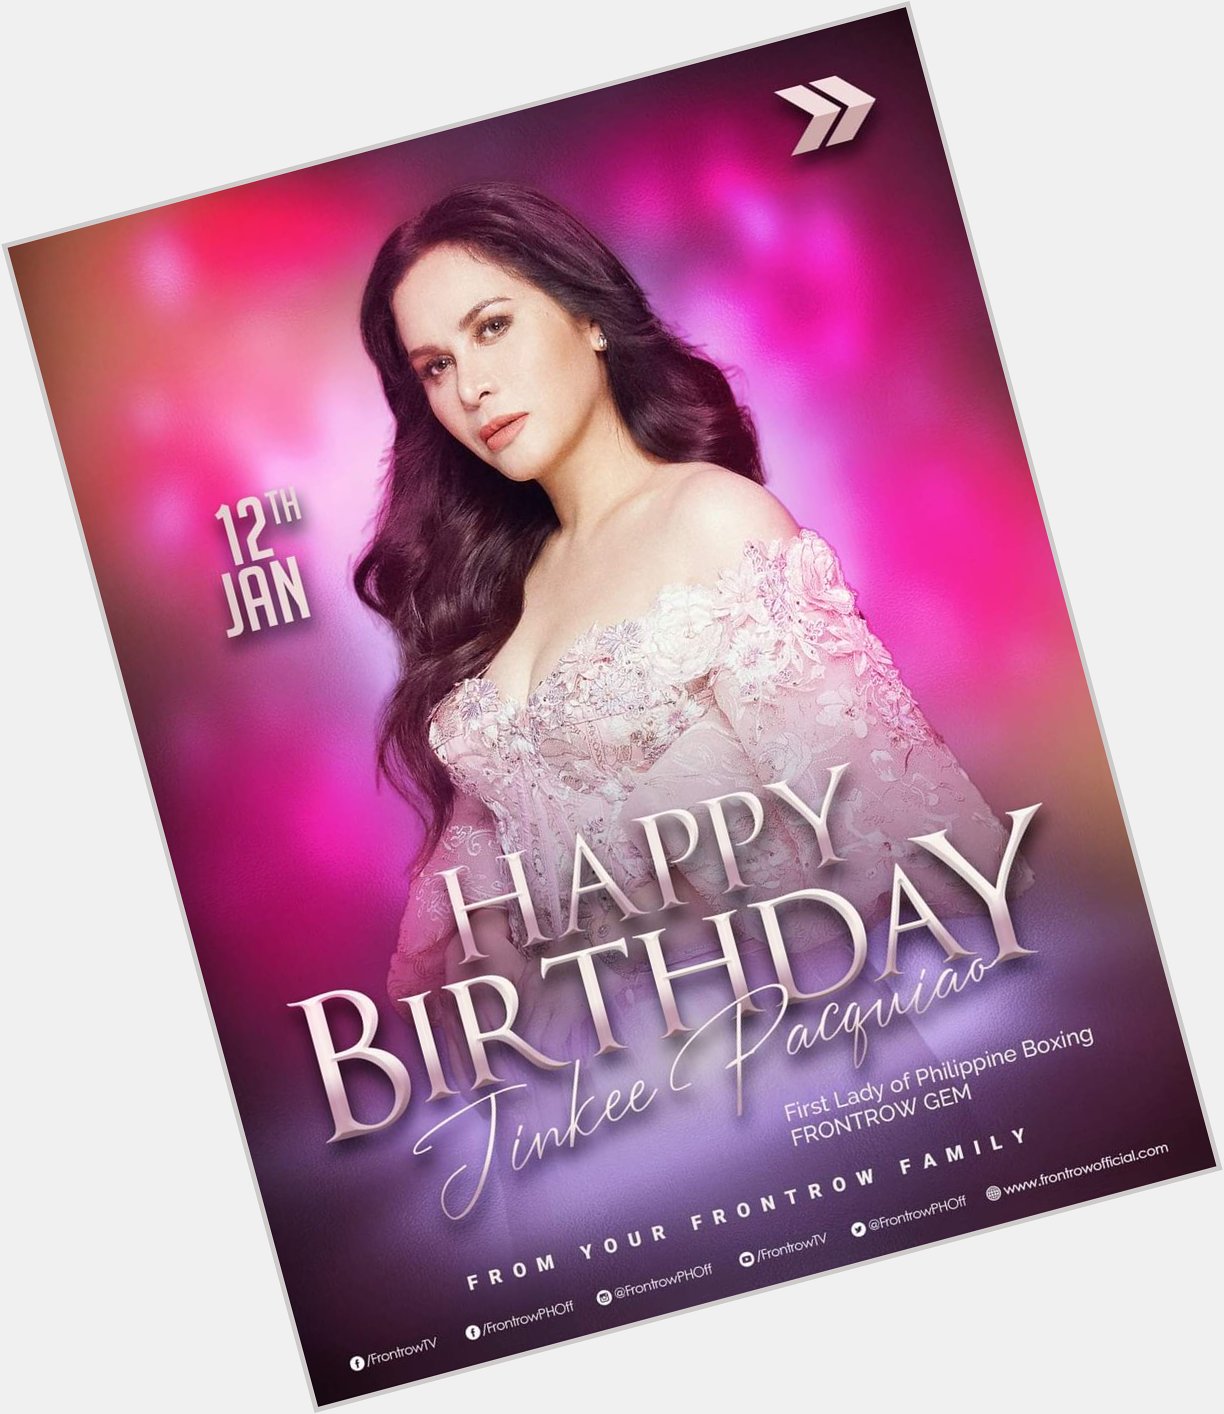 HAPPY BIRTHDAY to the one and only First Lady of Philippine Boxing and Ms. Jinkee Pacquiao  